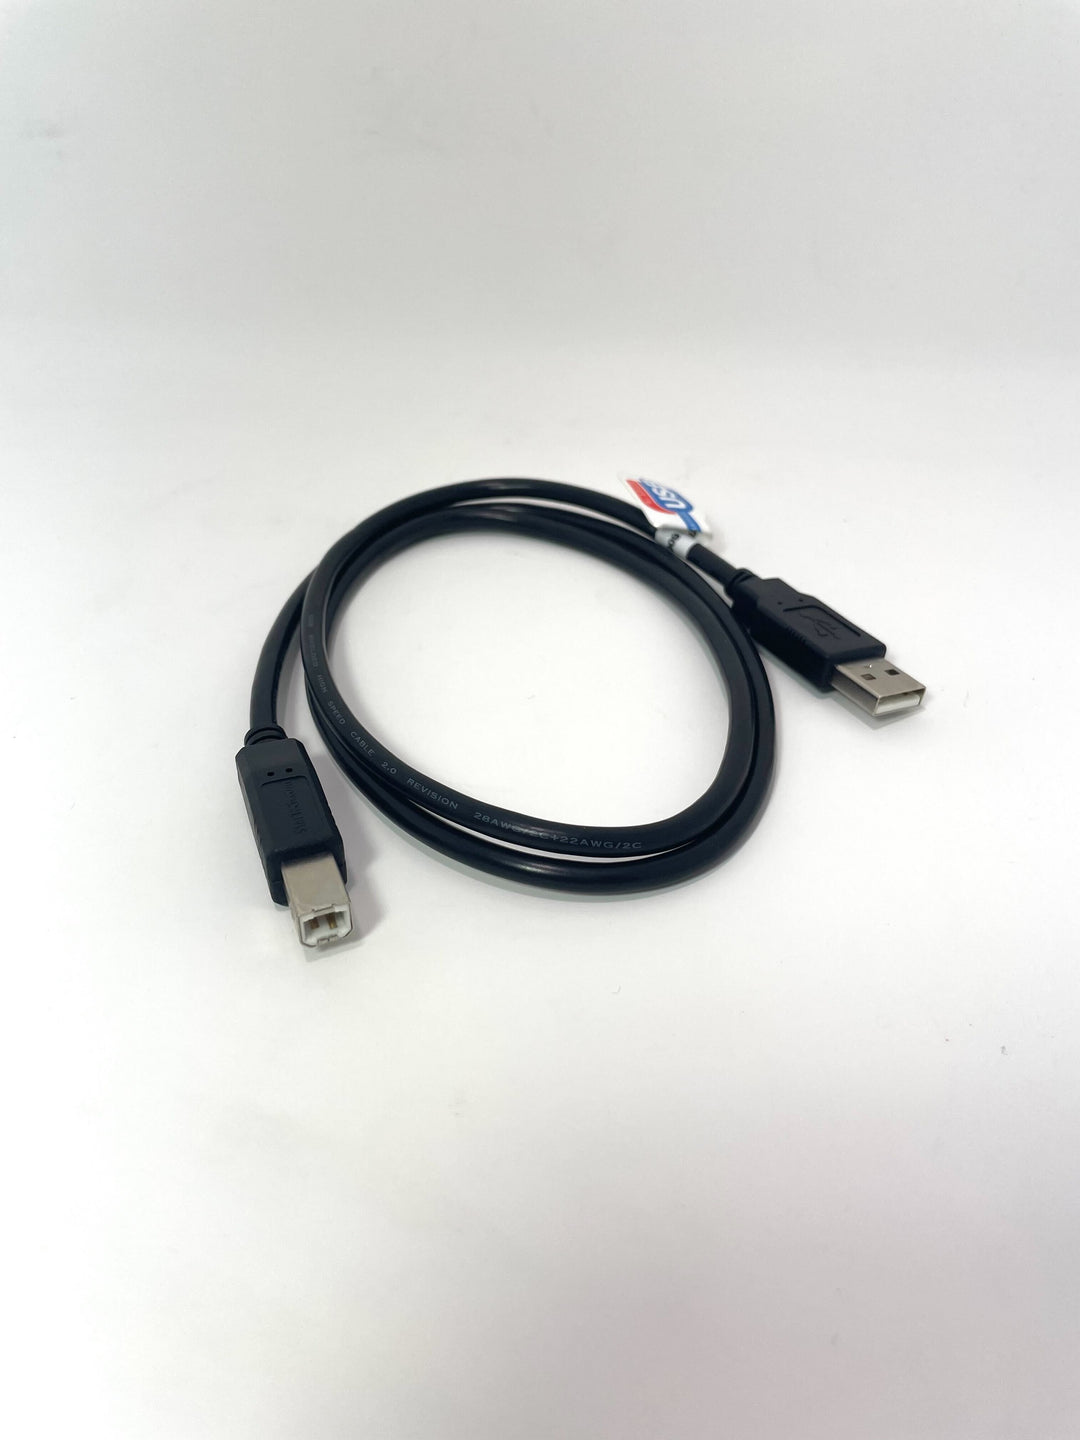 3 ft USB 2.0 Certified A to B Cable